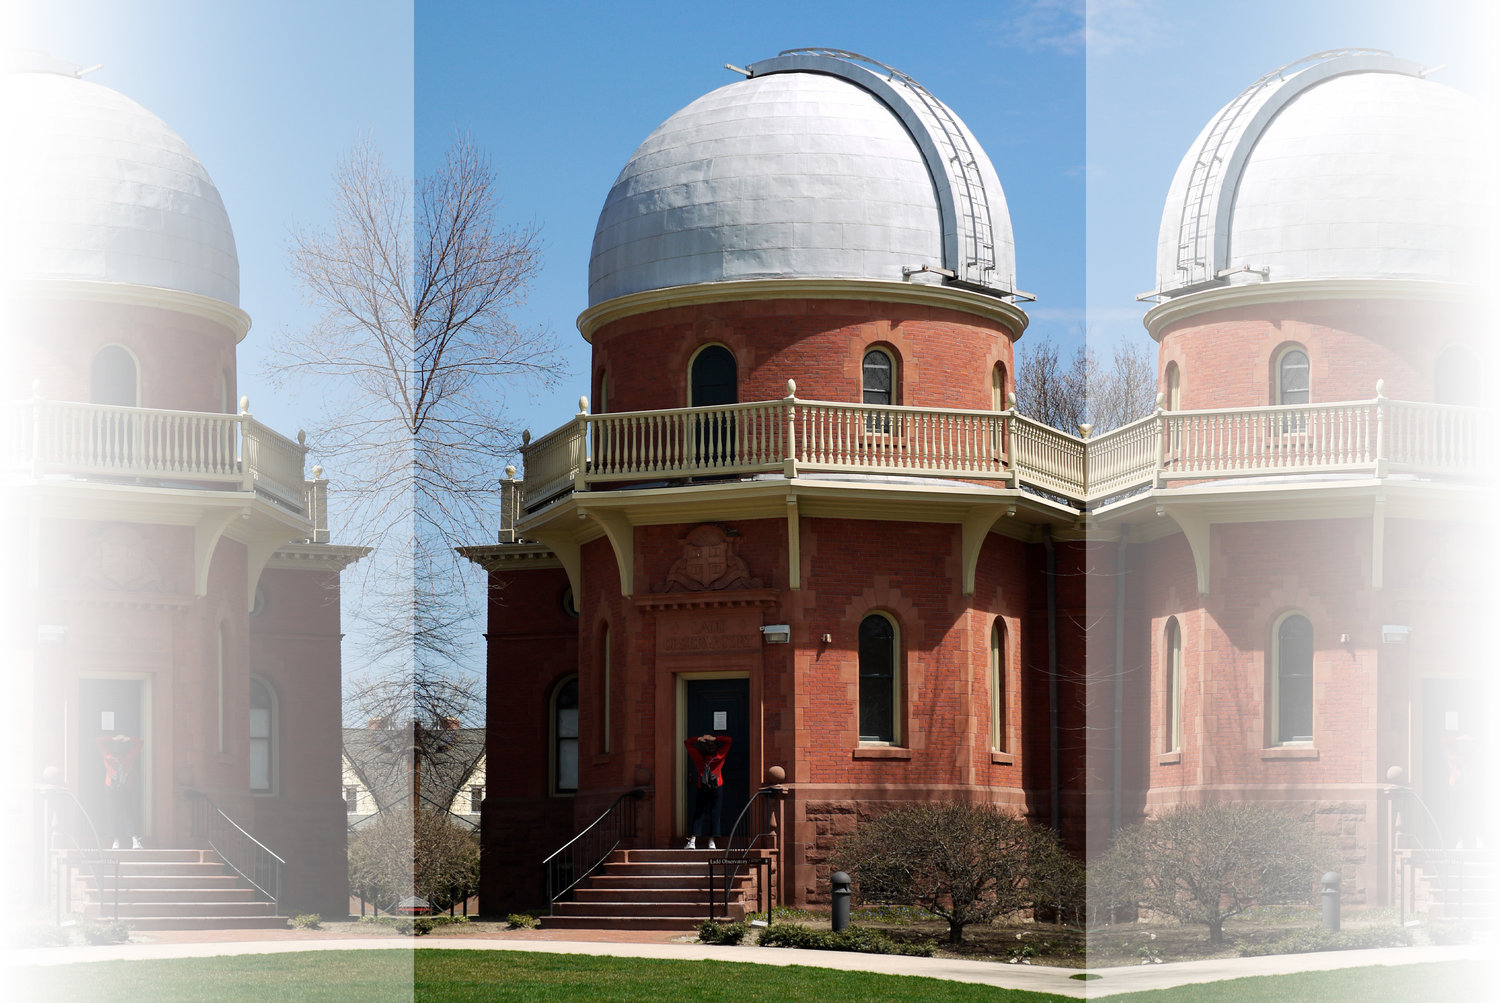 The domed building at the corner of hope and doyle is ladd observatory